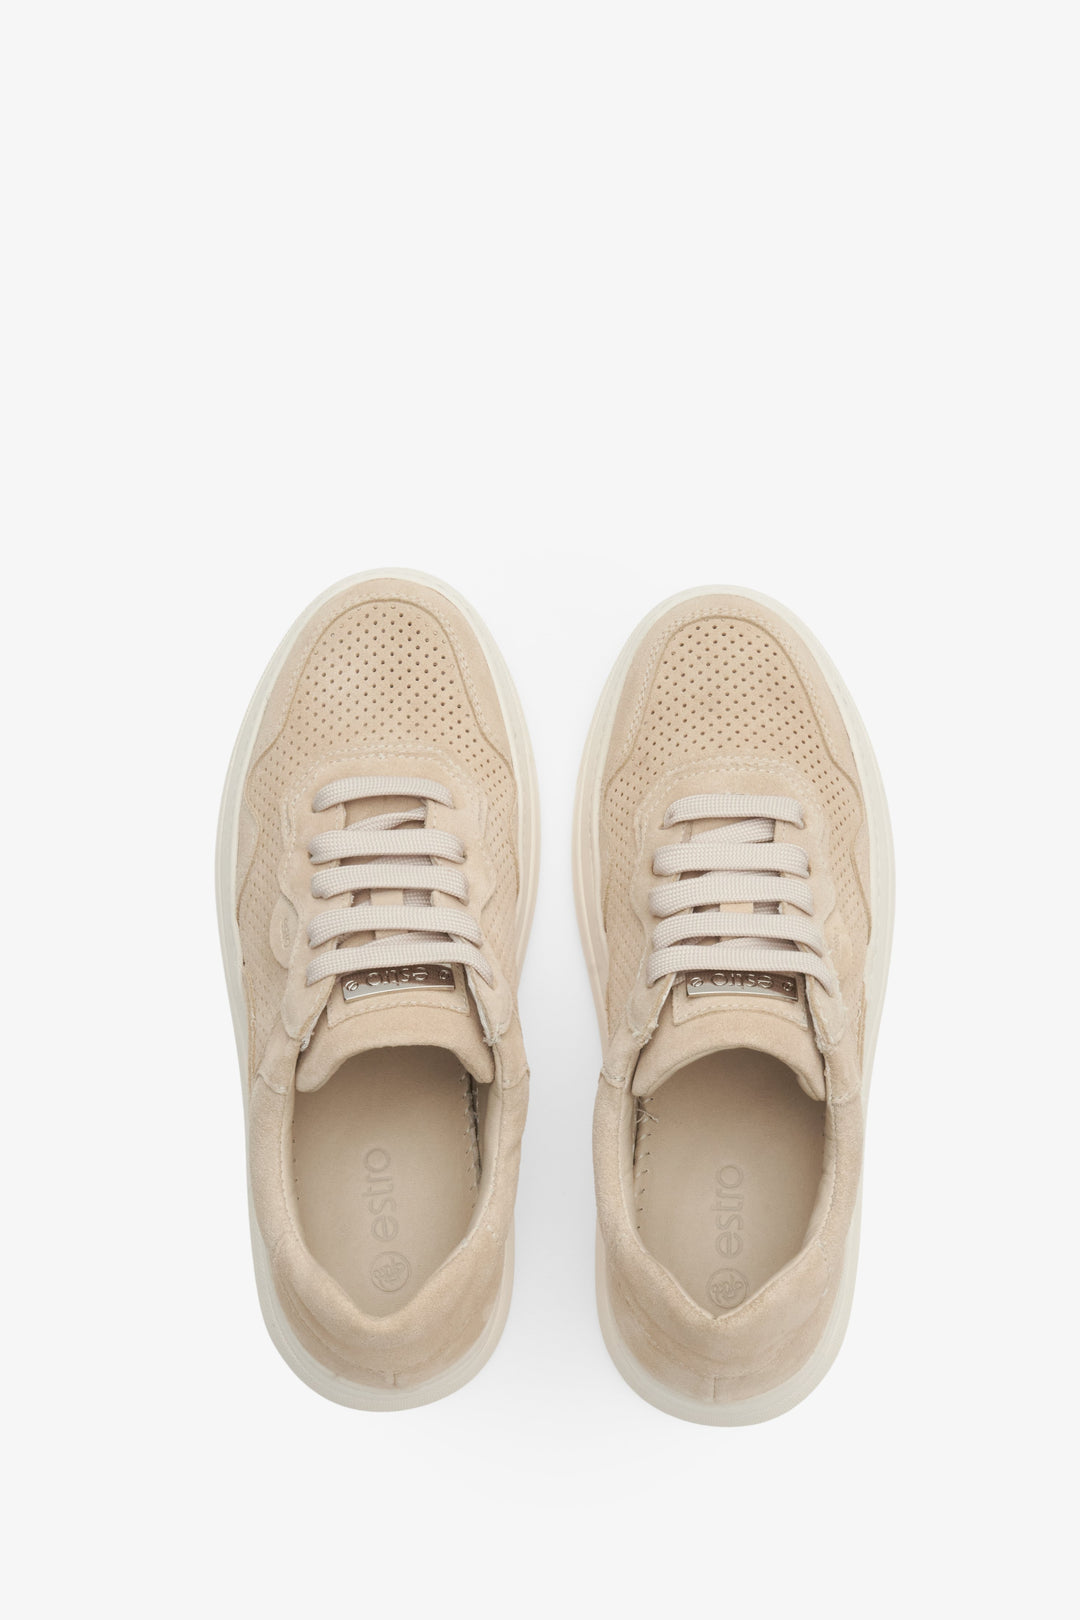 Light beige Estro women's natural suede sneakers for summer - shoe presentation from above.